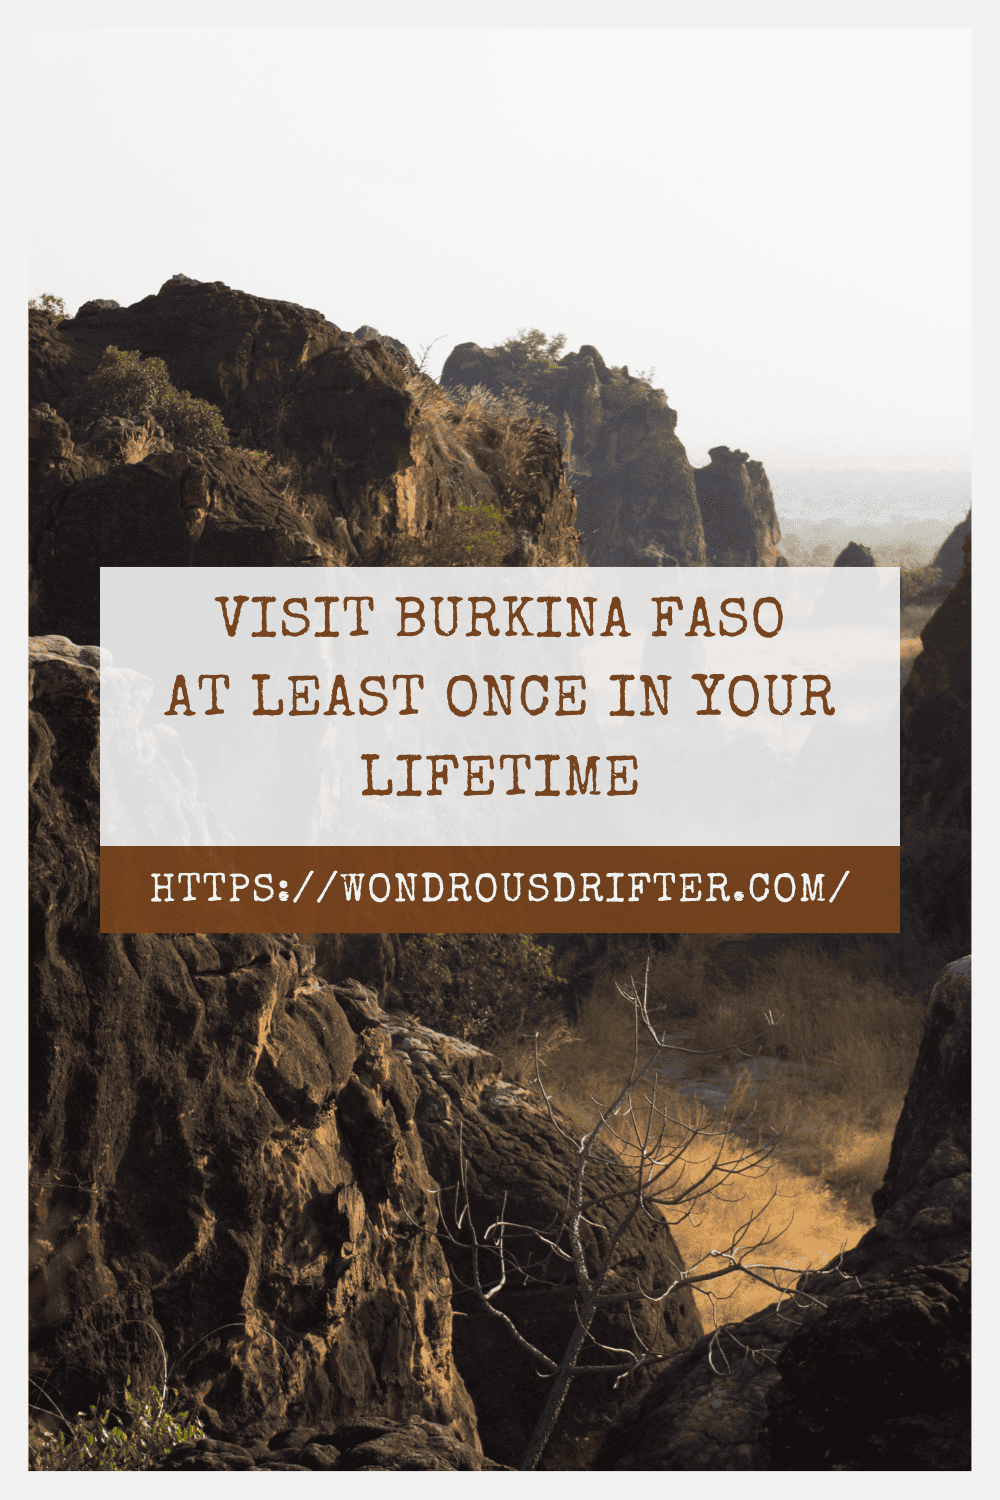 Visit Burkina Faso at least once in your lifetime